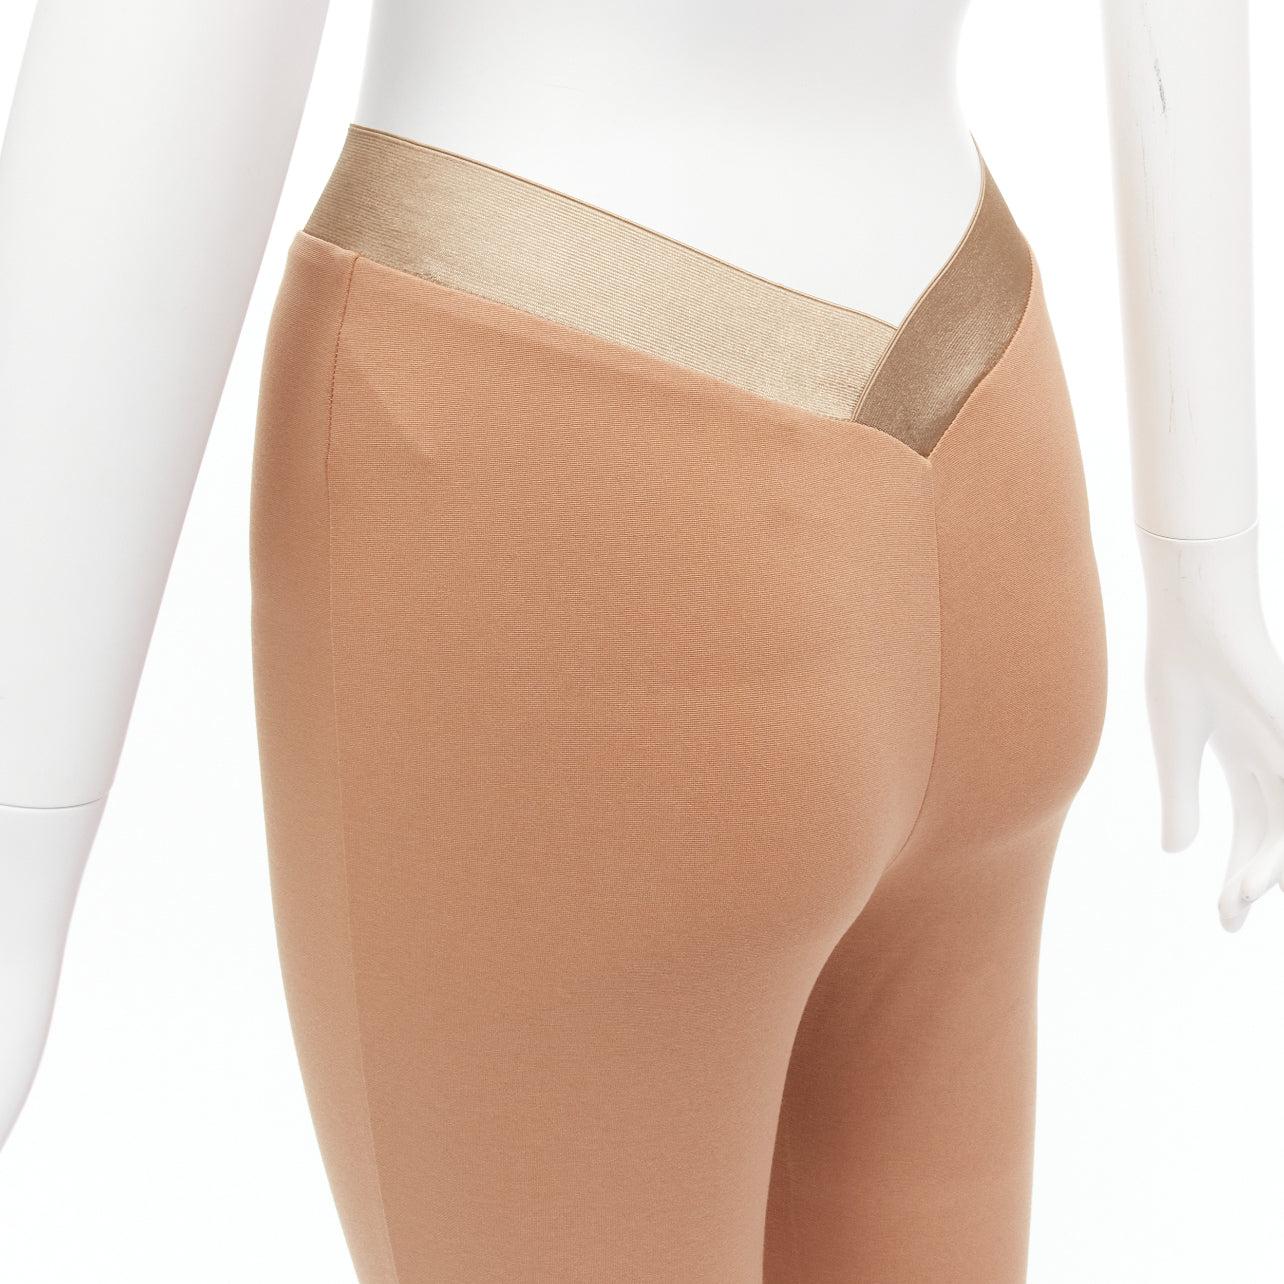 MAISON MARGIELA champagne gold dipped back waistband nude tights FR40 L
Reference: BSHW/A00047
Brand: Maison Margiela
Designer: Martin Margiela
Material: Viscose, Blend
Color: Nude, Gold
Pattern: Solid
Closure: Elasticated
Extra Details: Dipped V